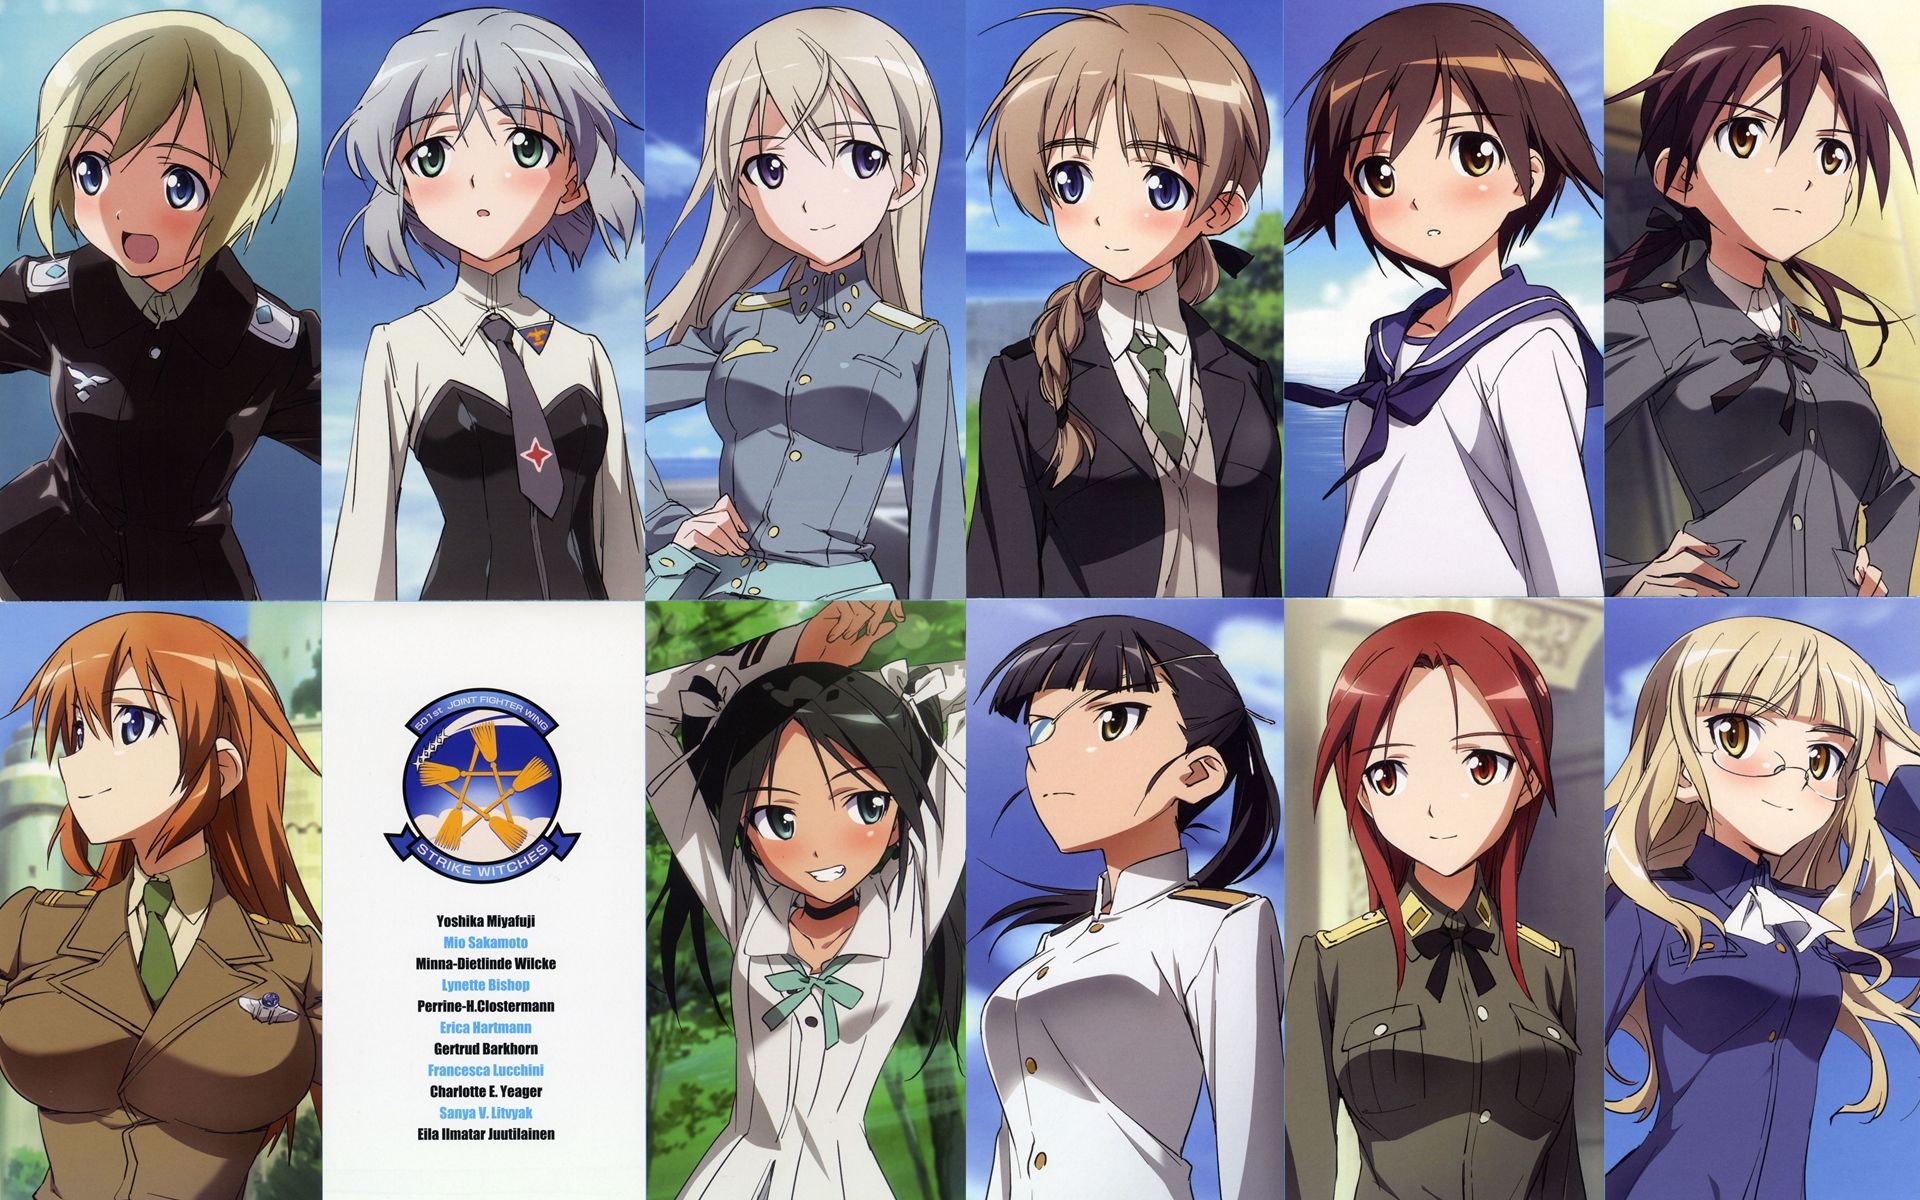 Strike Witches: The Movie #23